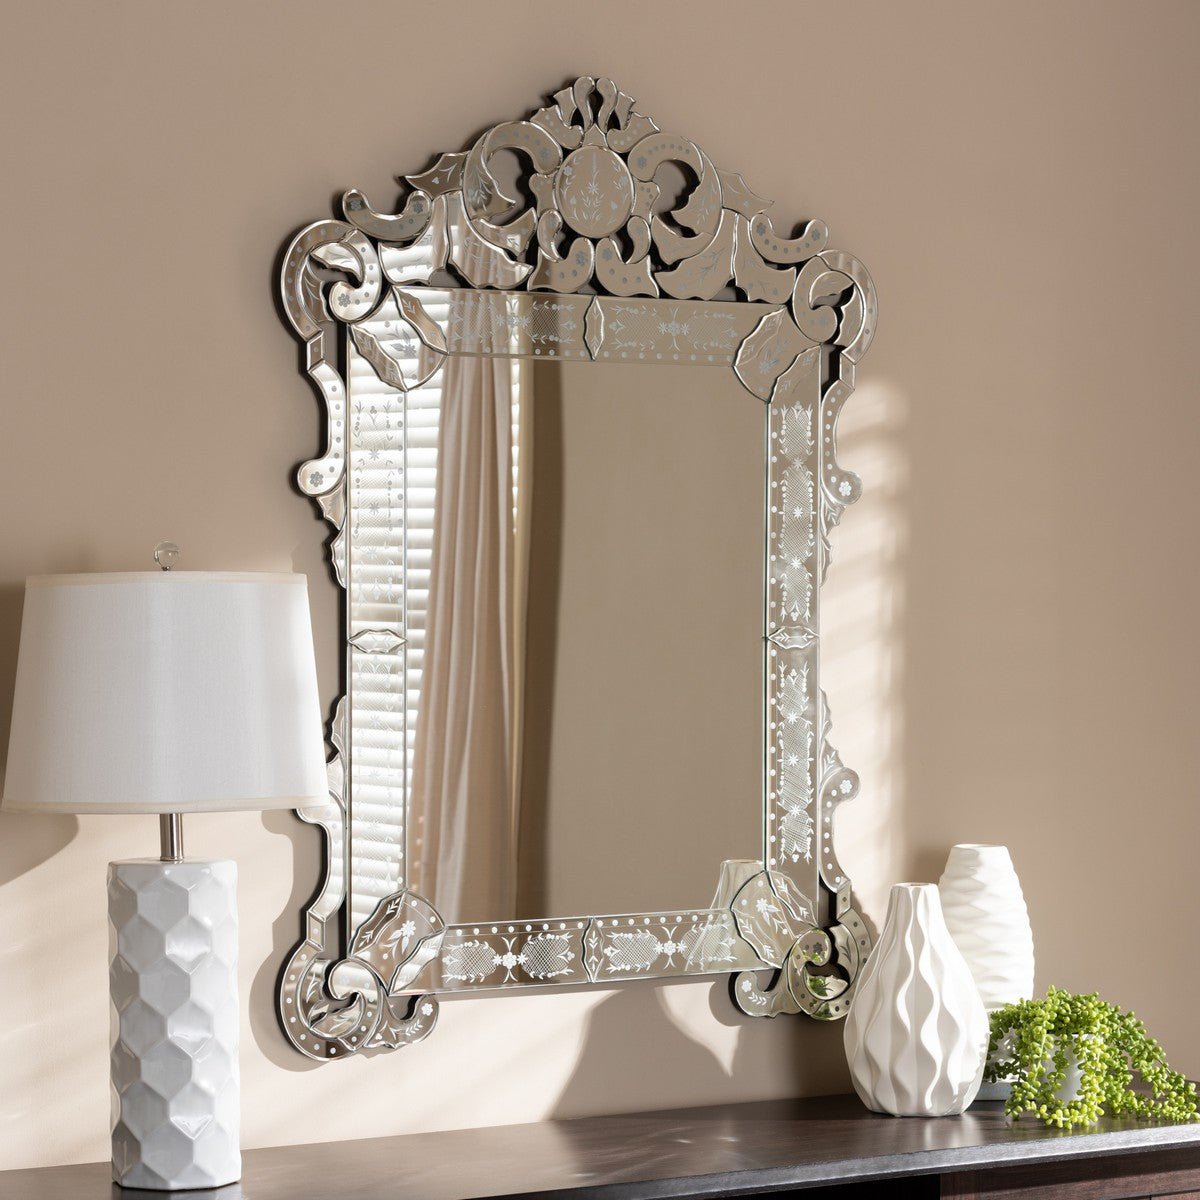 Baxton Studio Floriana Classic and Traditional Silver Finished Venetian Style Accent Wall Mirror